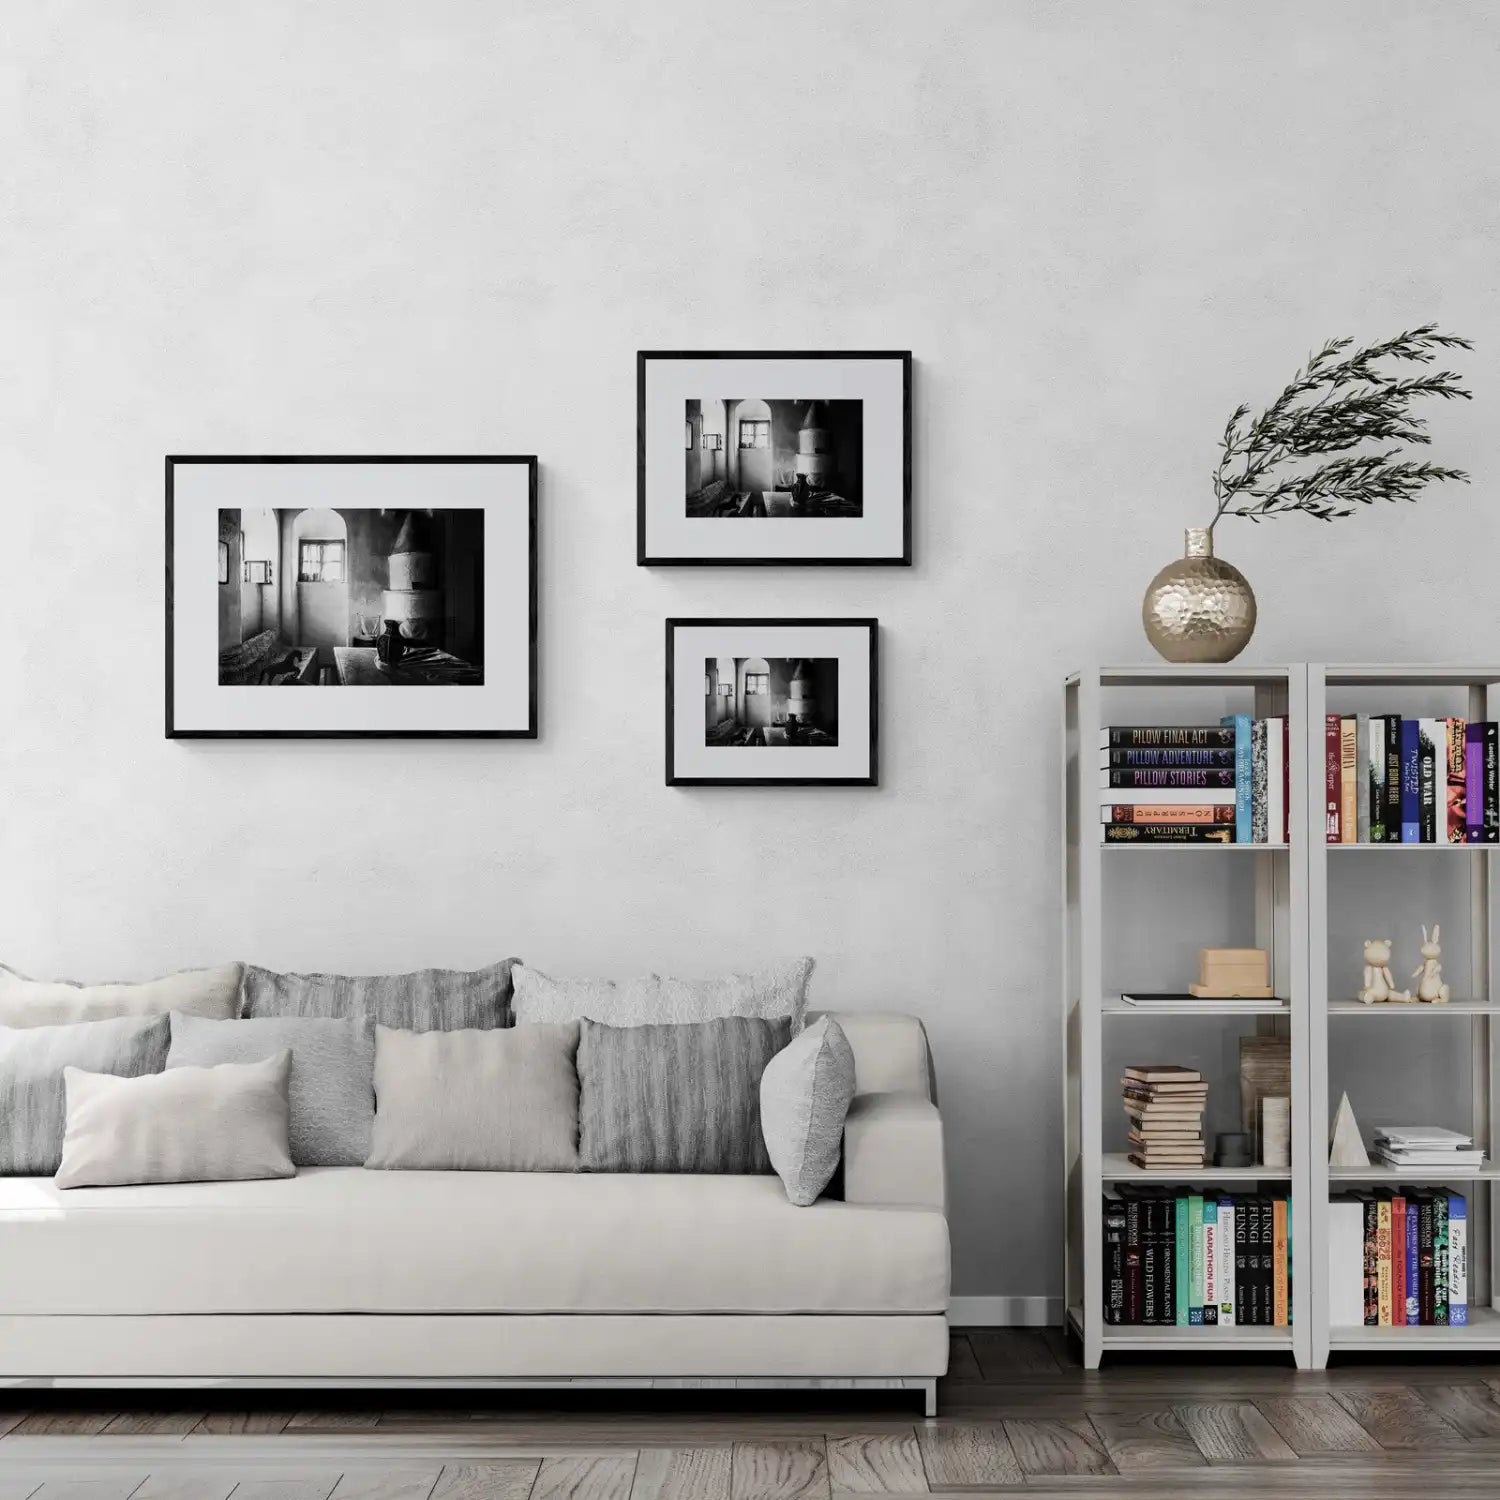 Filiates, Thesprotia, Epirus, Greece | Interior with Fireplace | Black-and-White Wall Art Photography - framing options